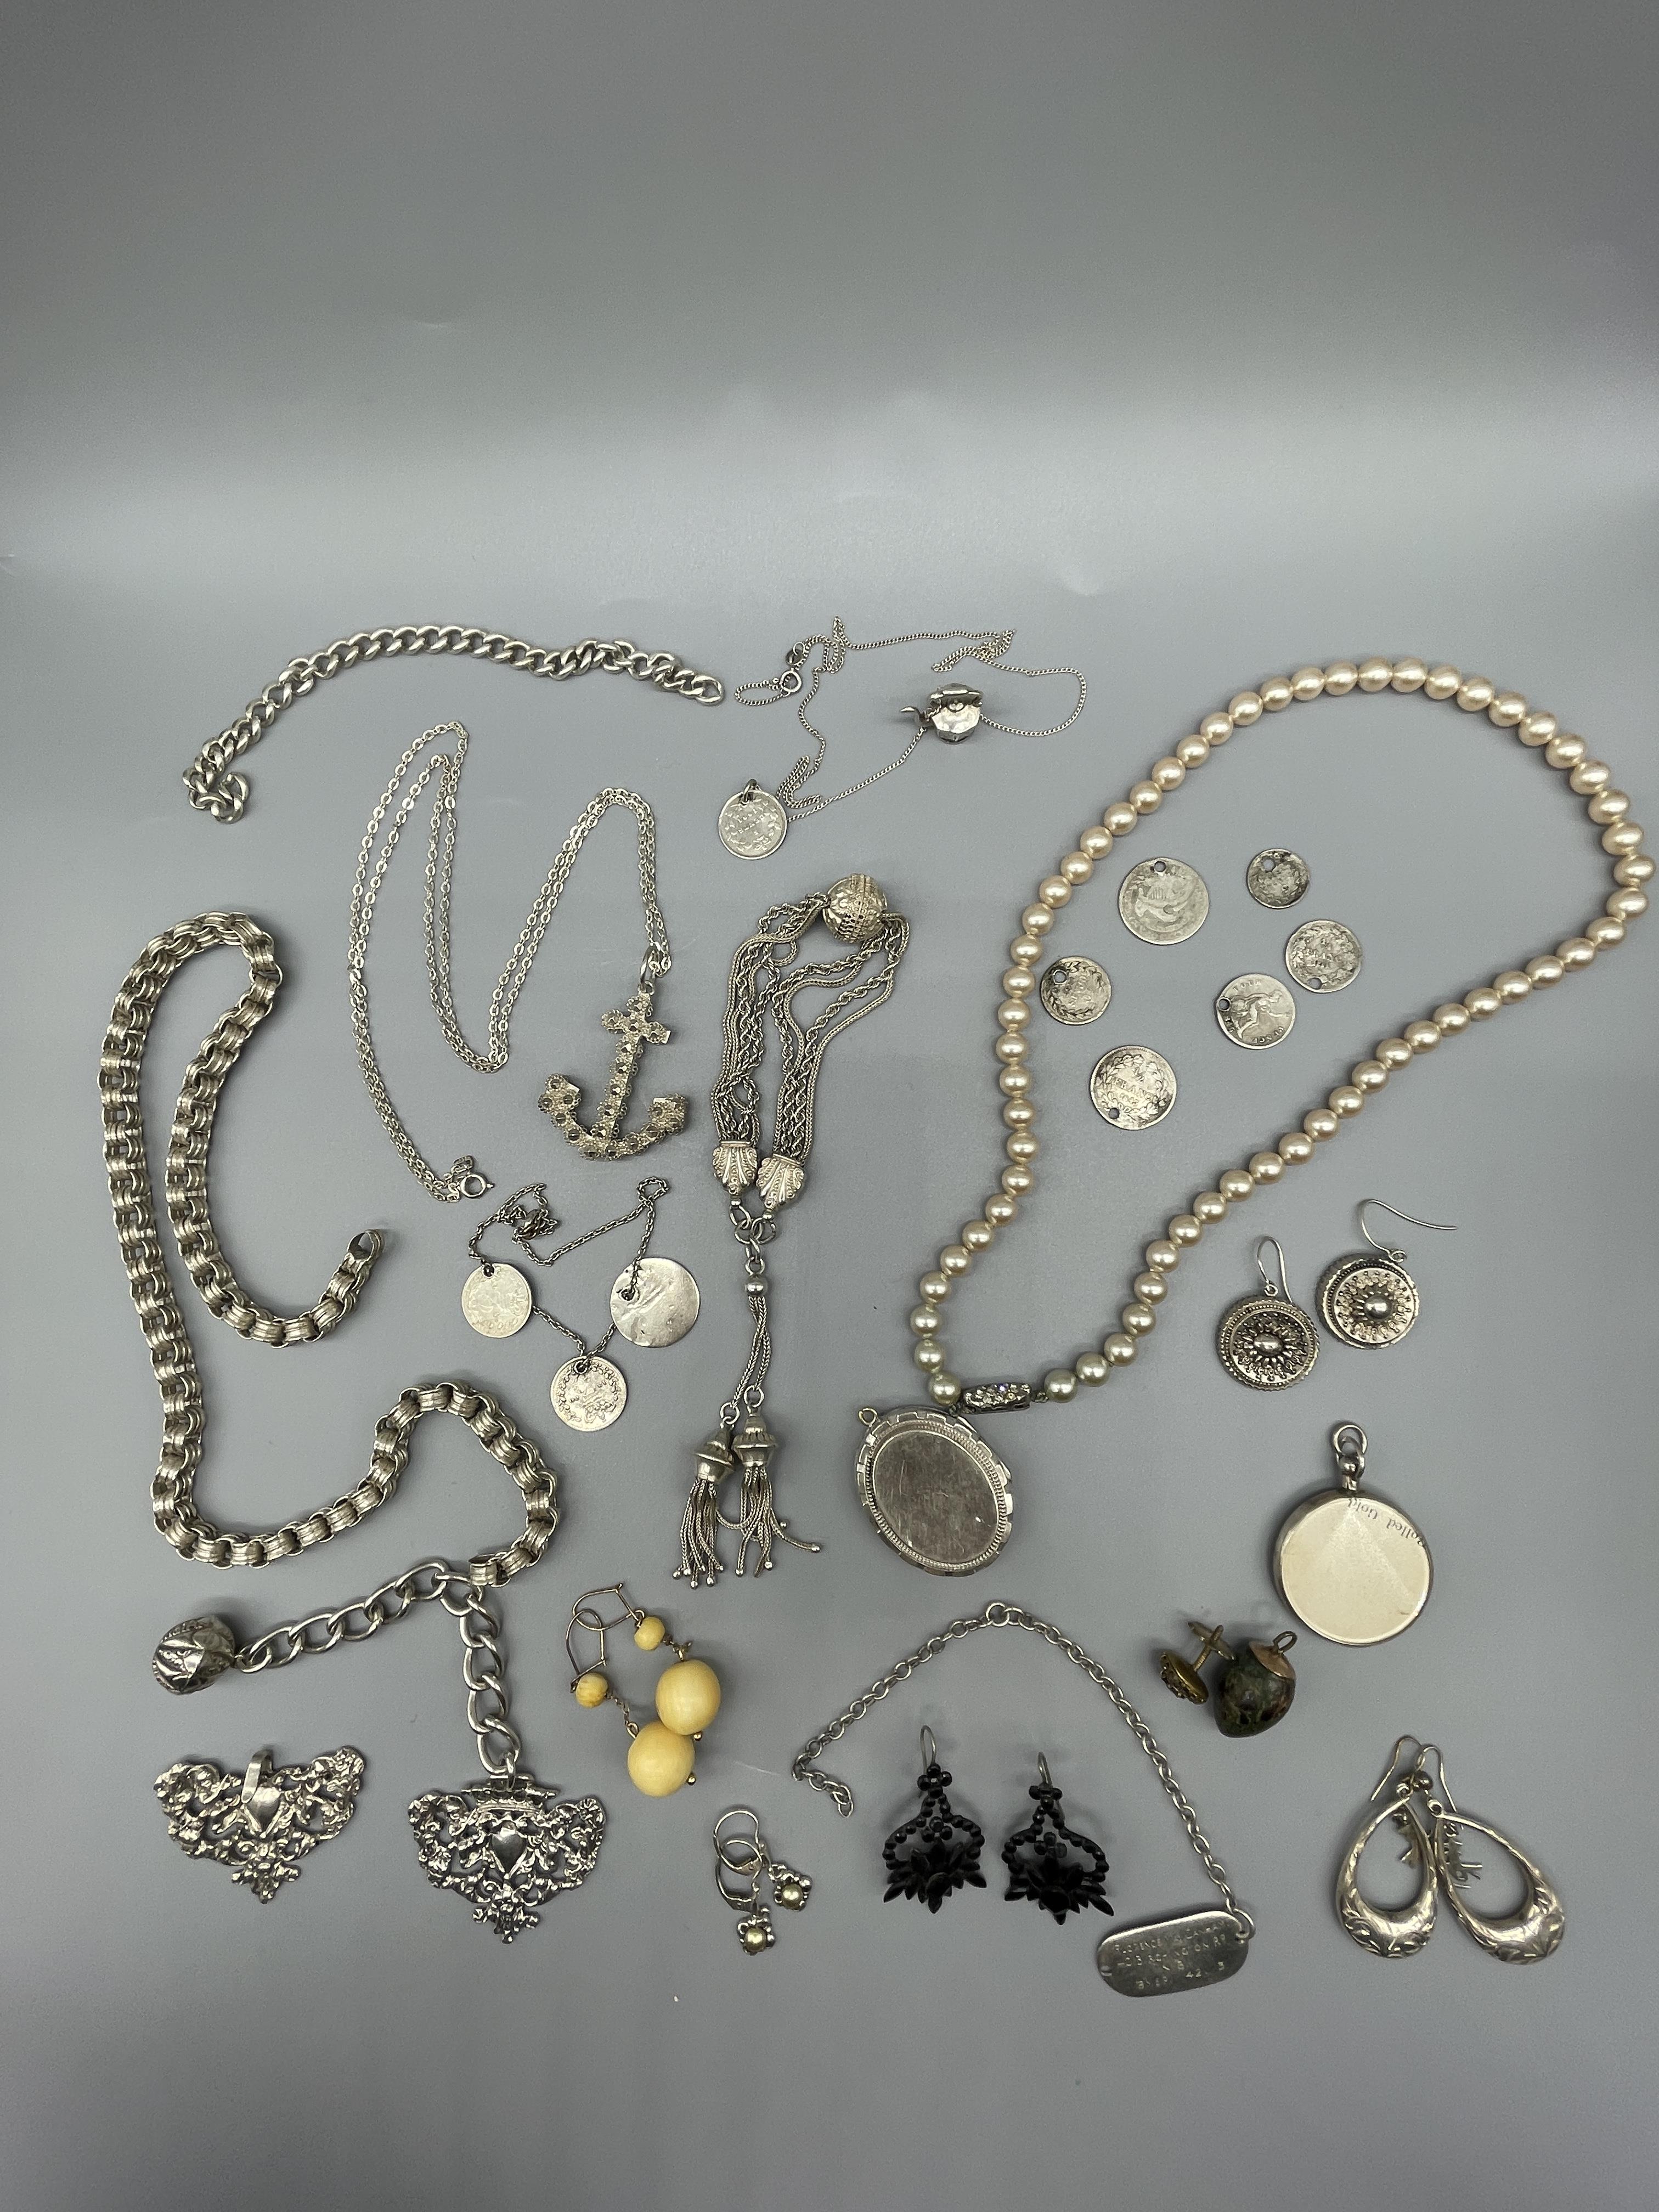 Silver Jewellery and dress jewellery - Image 7 of 7